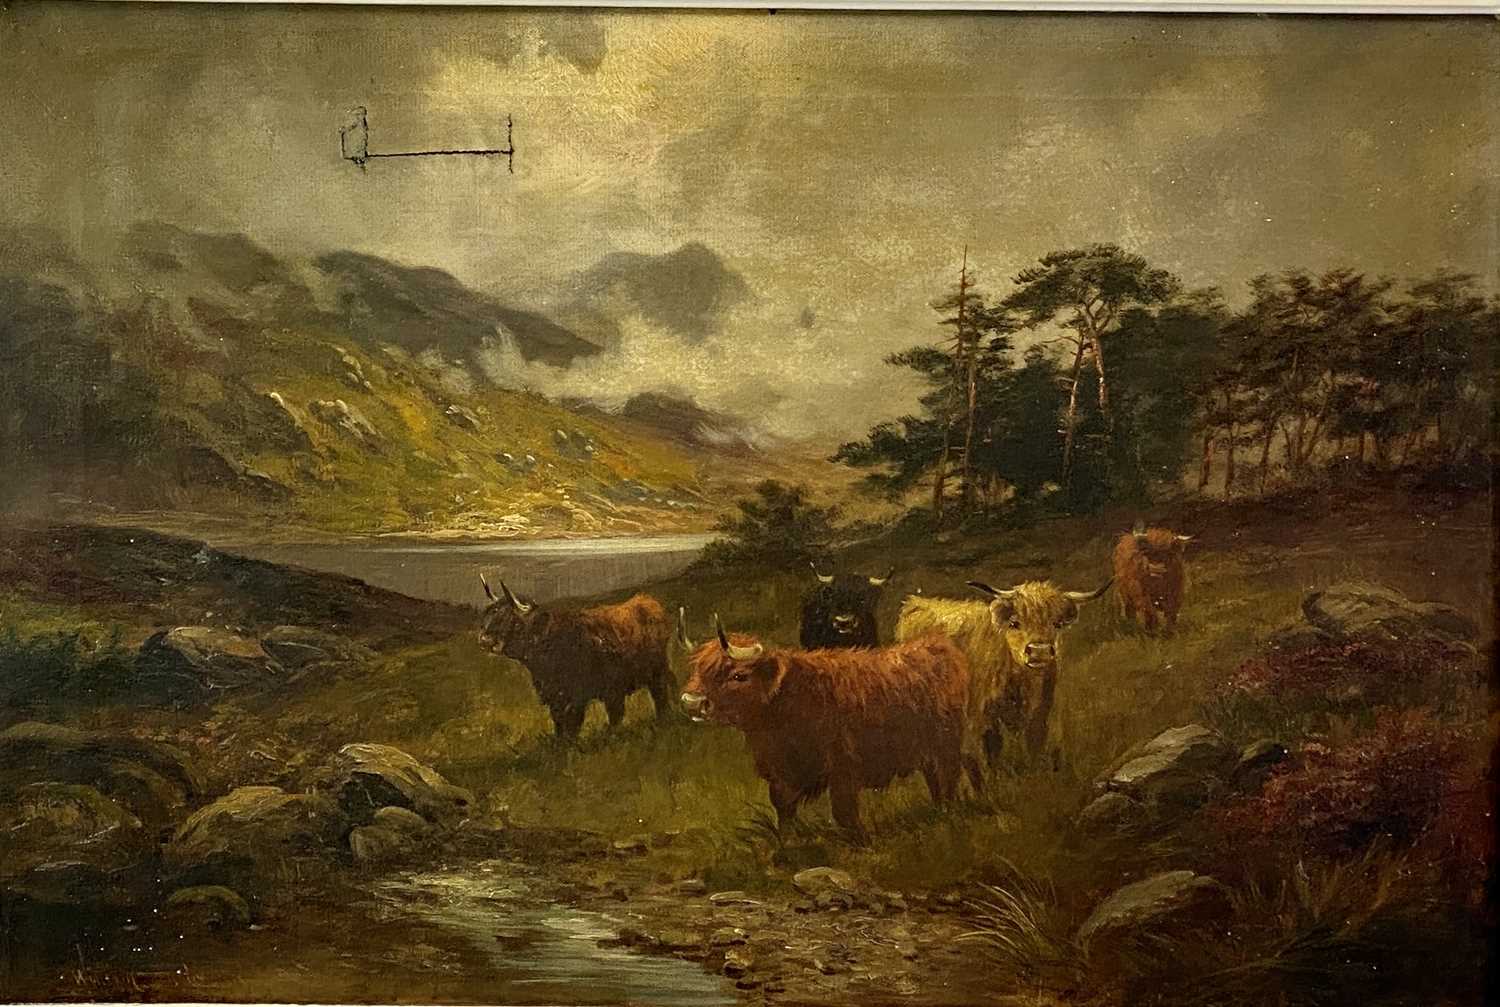 WILLIAM ?????? indistinctly signed oil on canvas - highland cattle at water's edge and dramatic